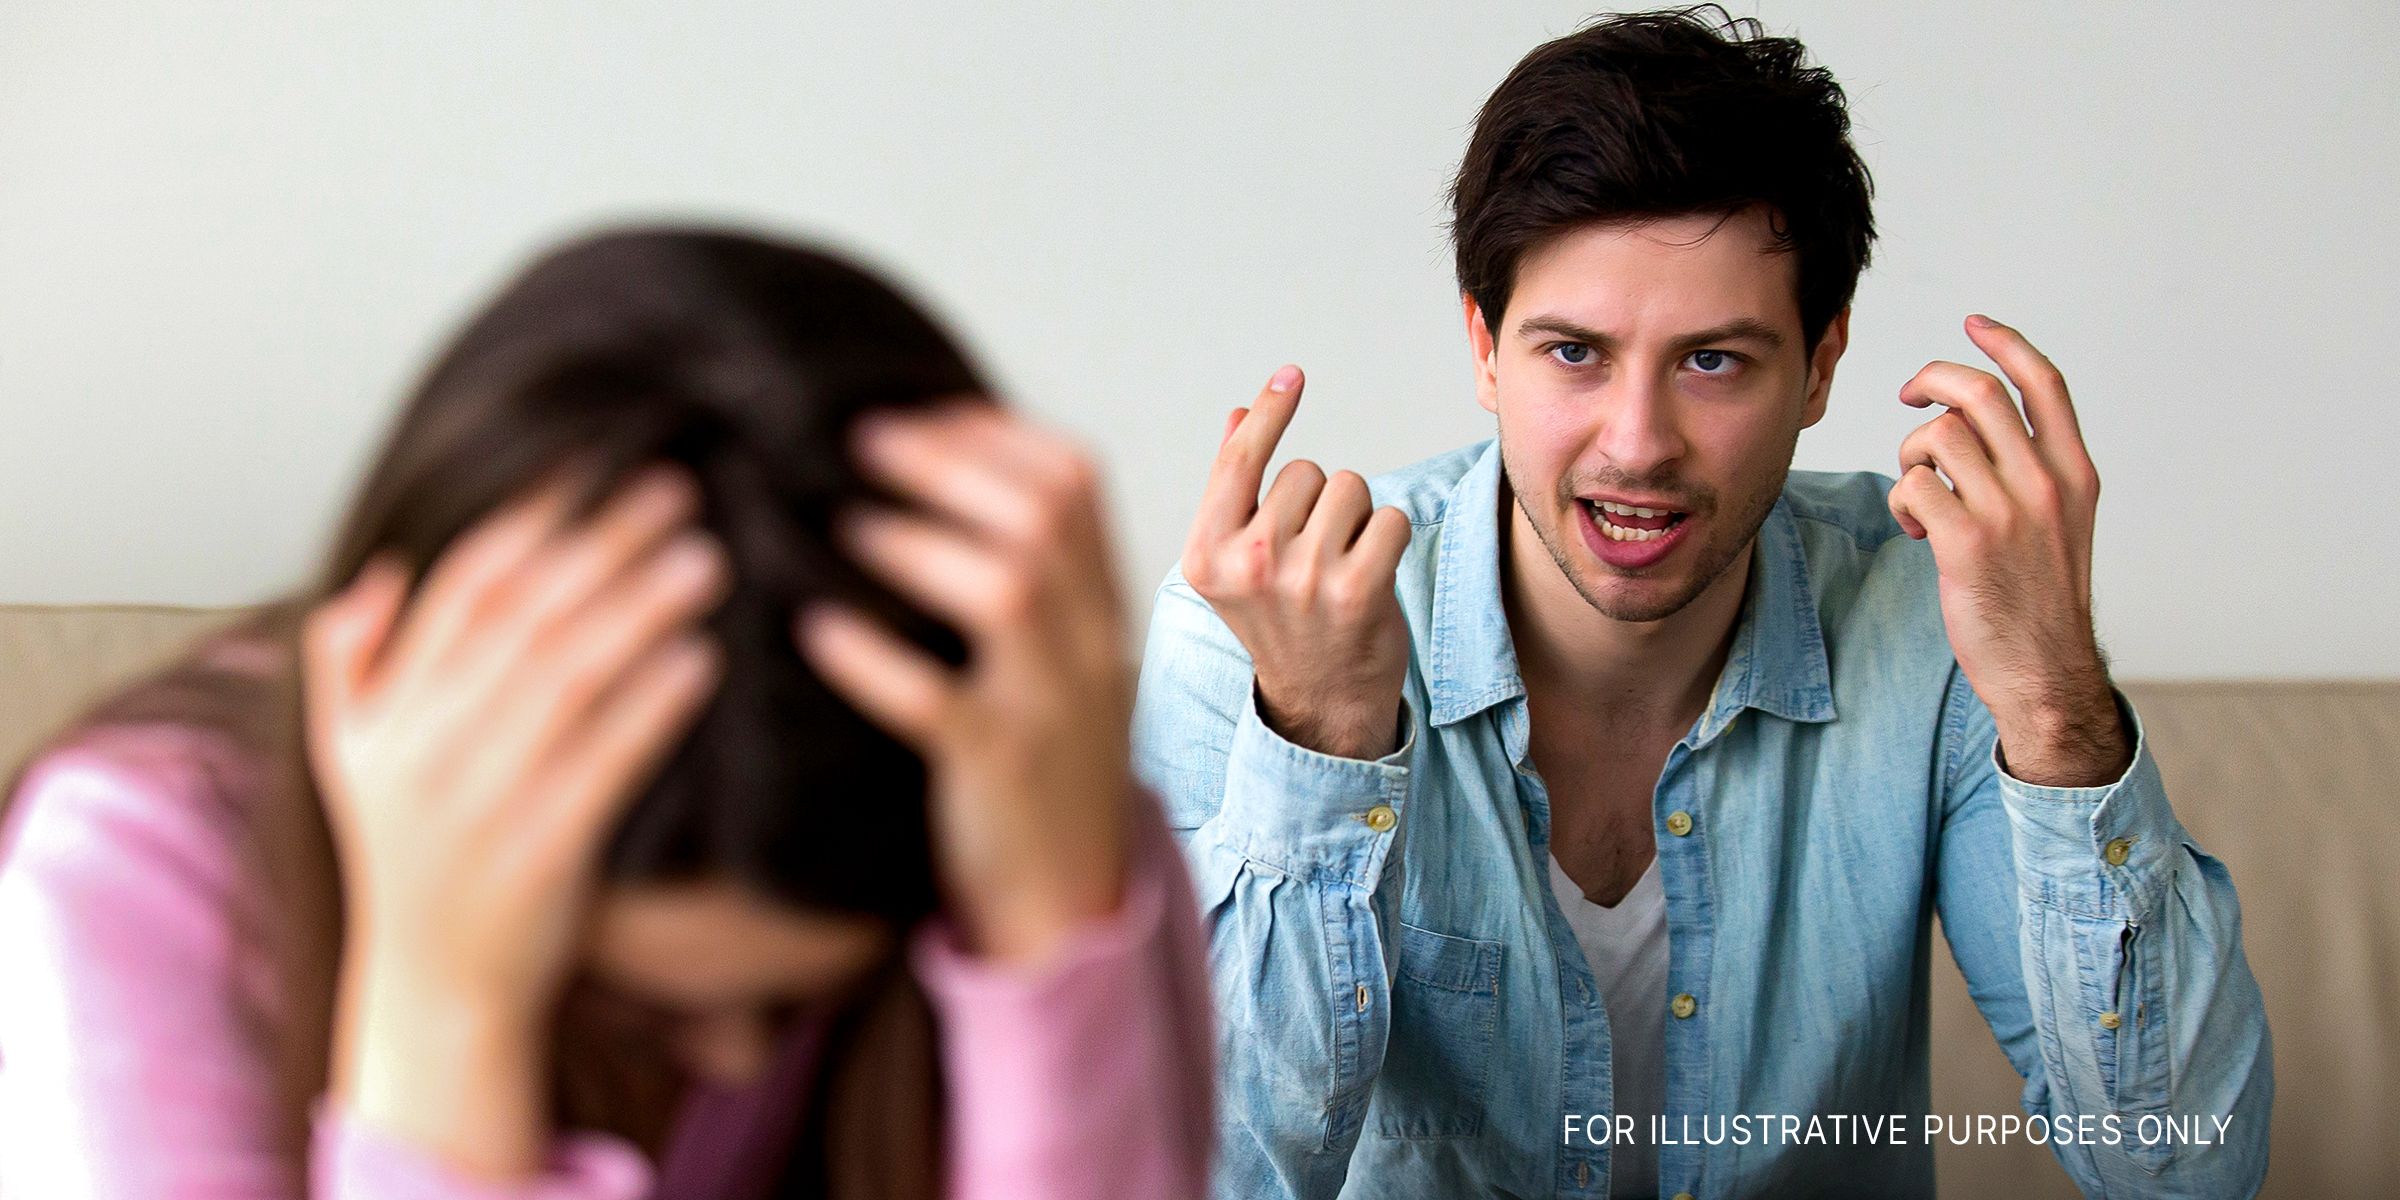 A man yelling at a woman as she buries her head in her hands | Source: Shutterstock